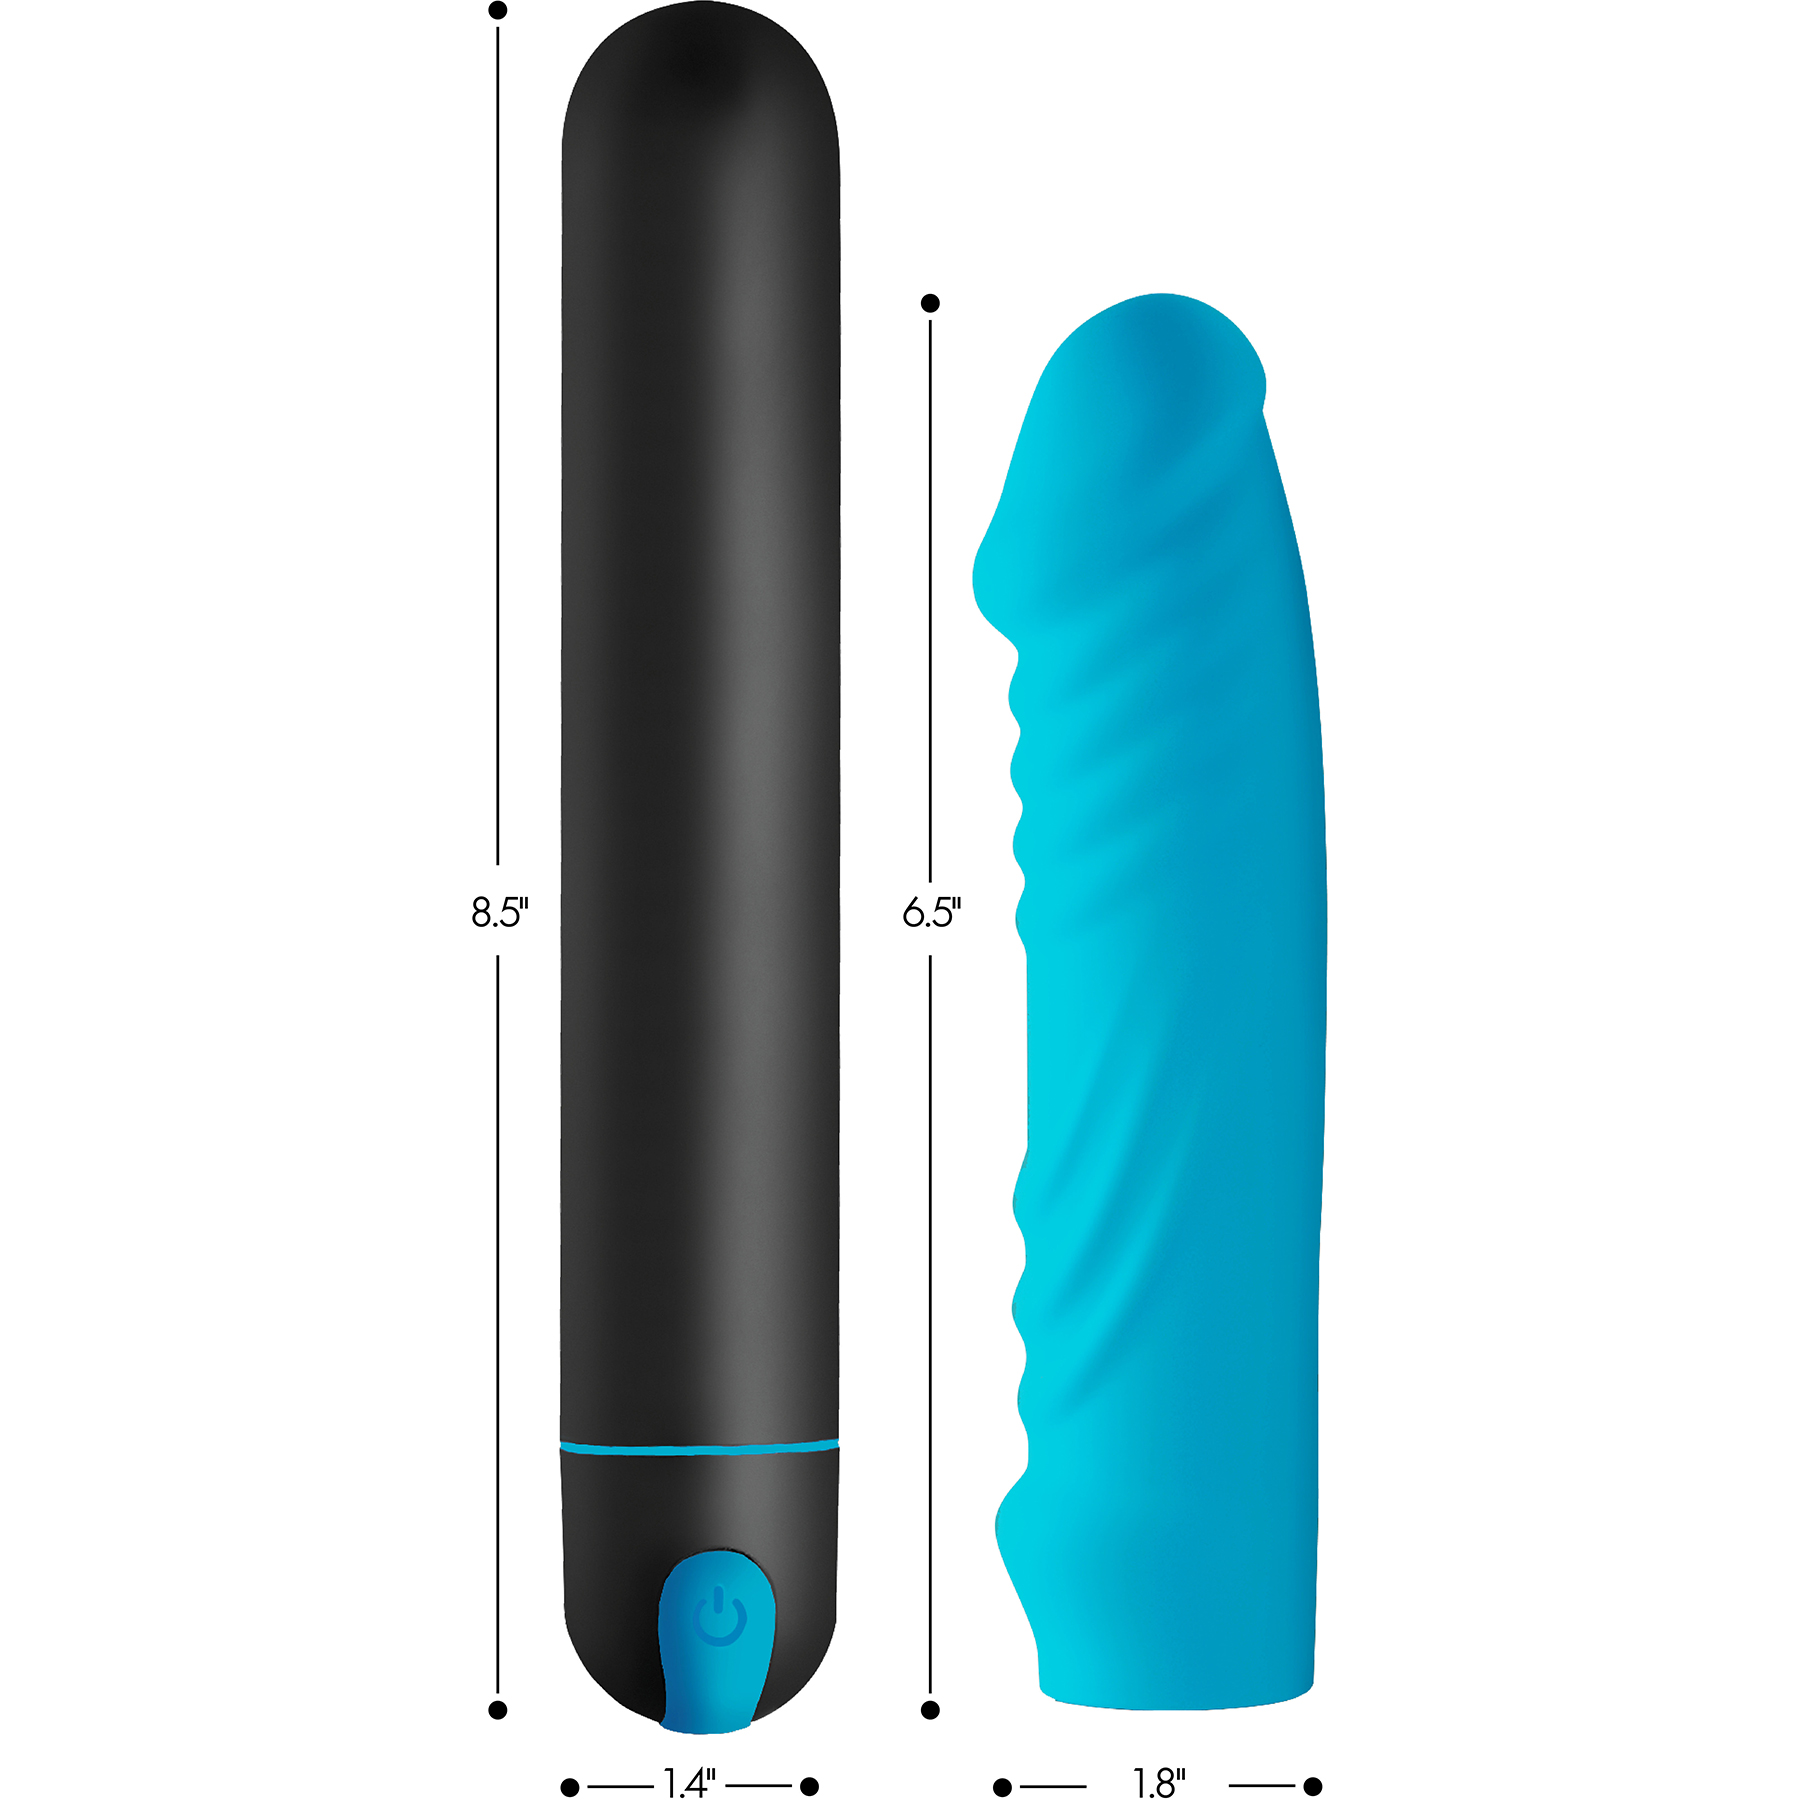 BANG! XL Rechargeable Waterproof Bullet Vibrator With Silicone Ribbed Textured Sleeve - Measurements